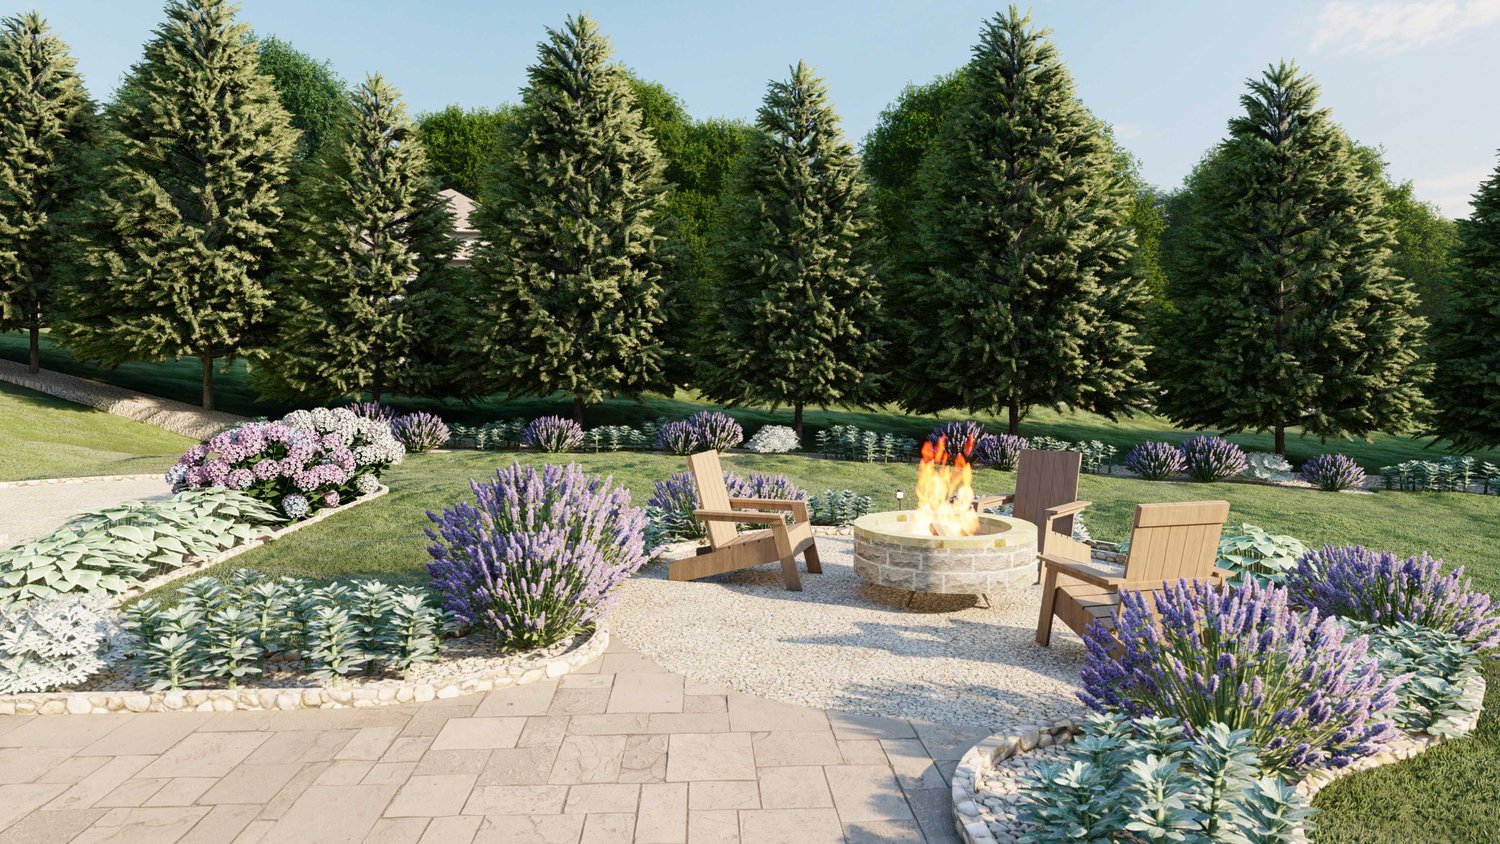 Cambridge yard with sitting area, fire pit and trees and flowers